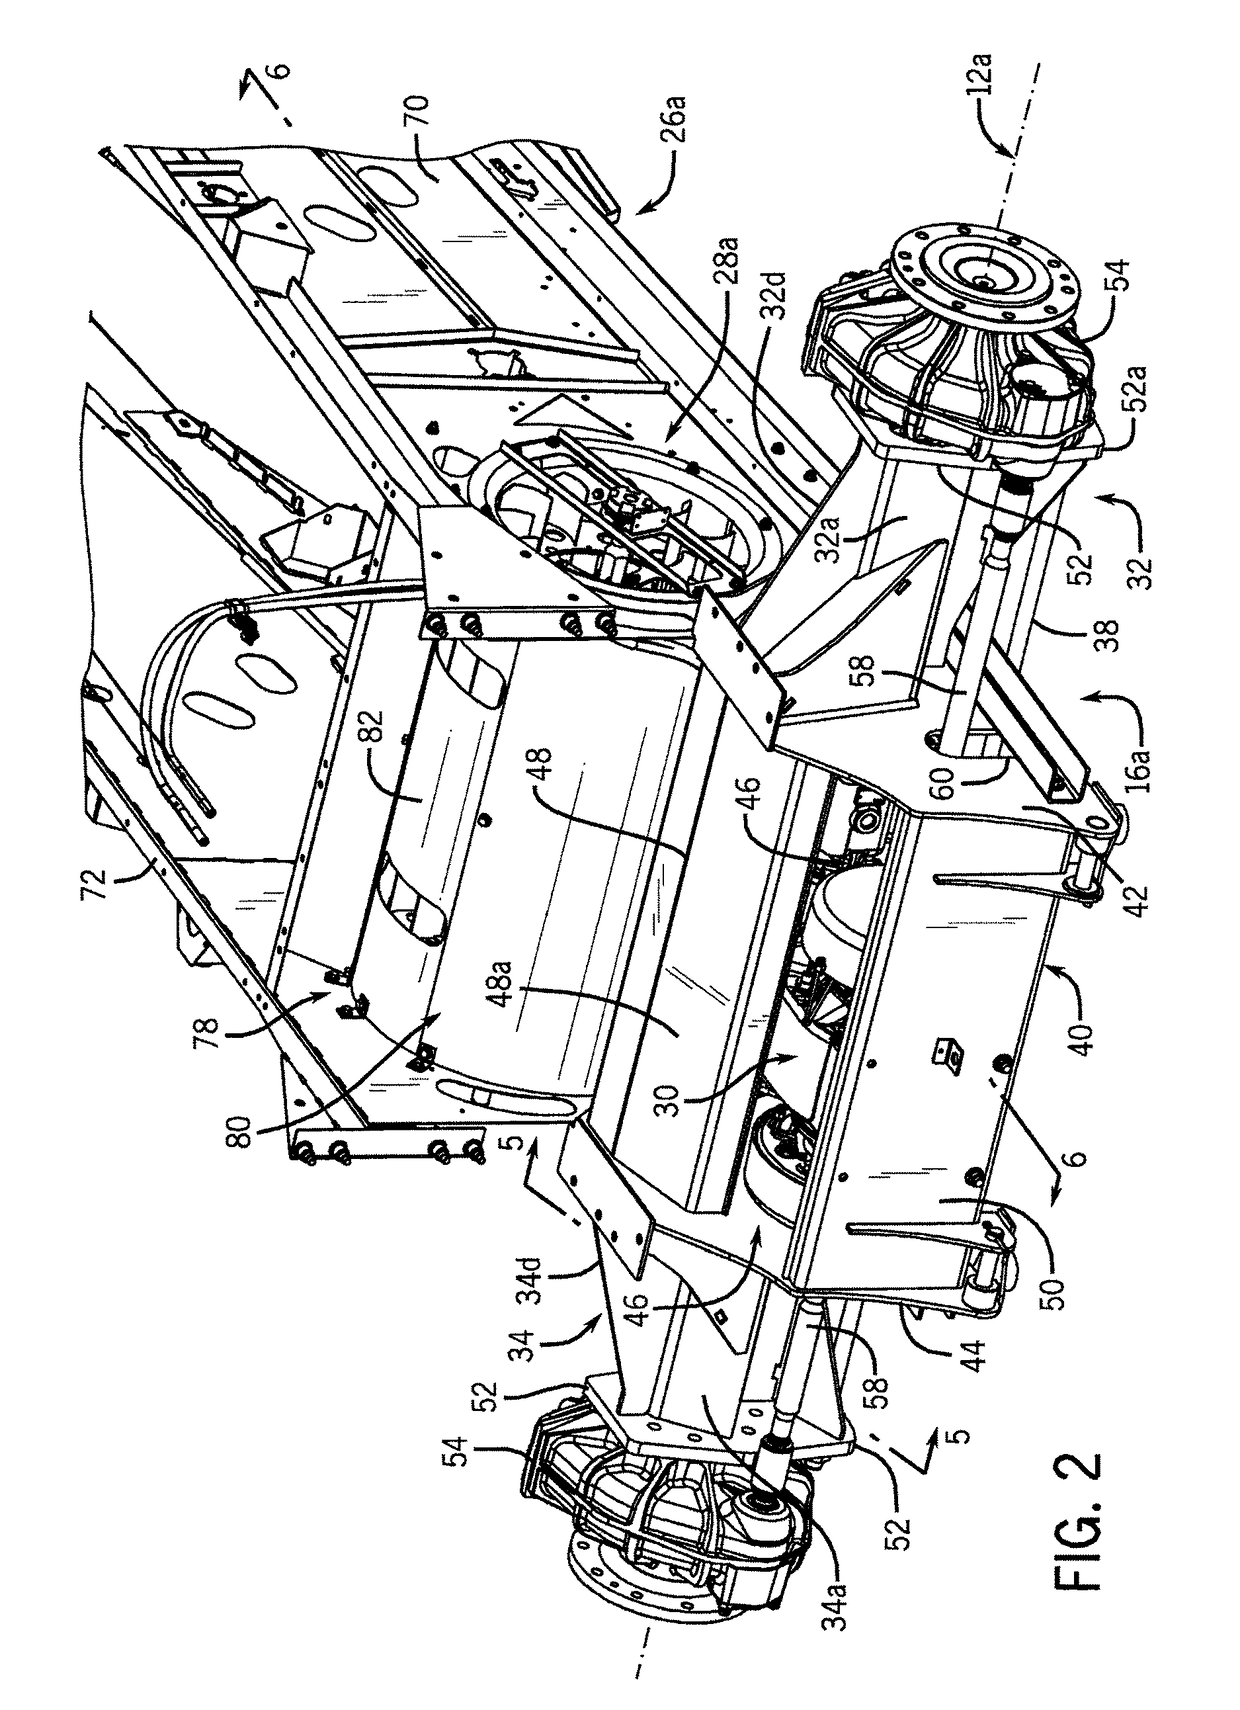 Integrated fan and axle arrangement for an agricultural vehicle